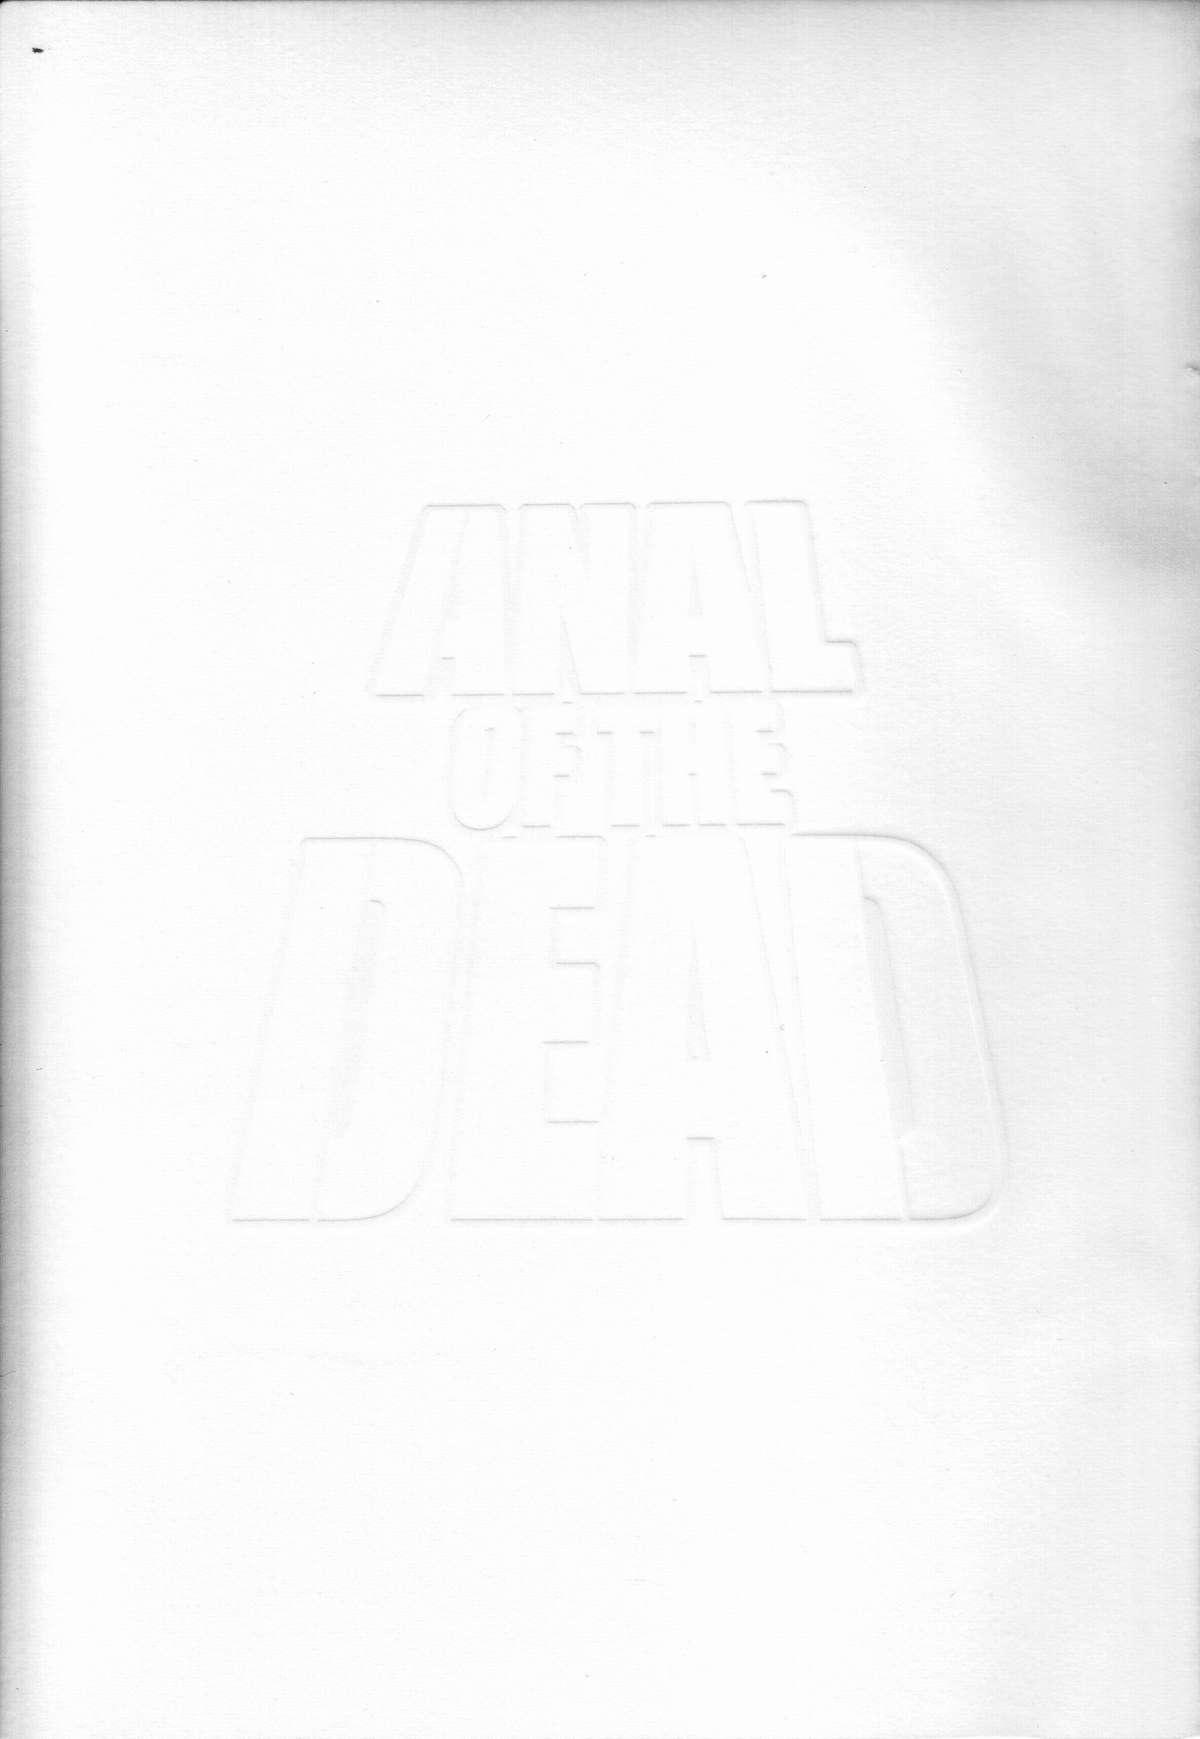 Anal of The Dead 4